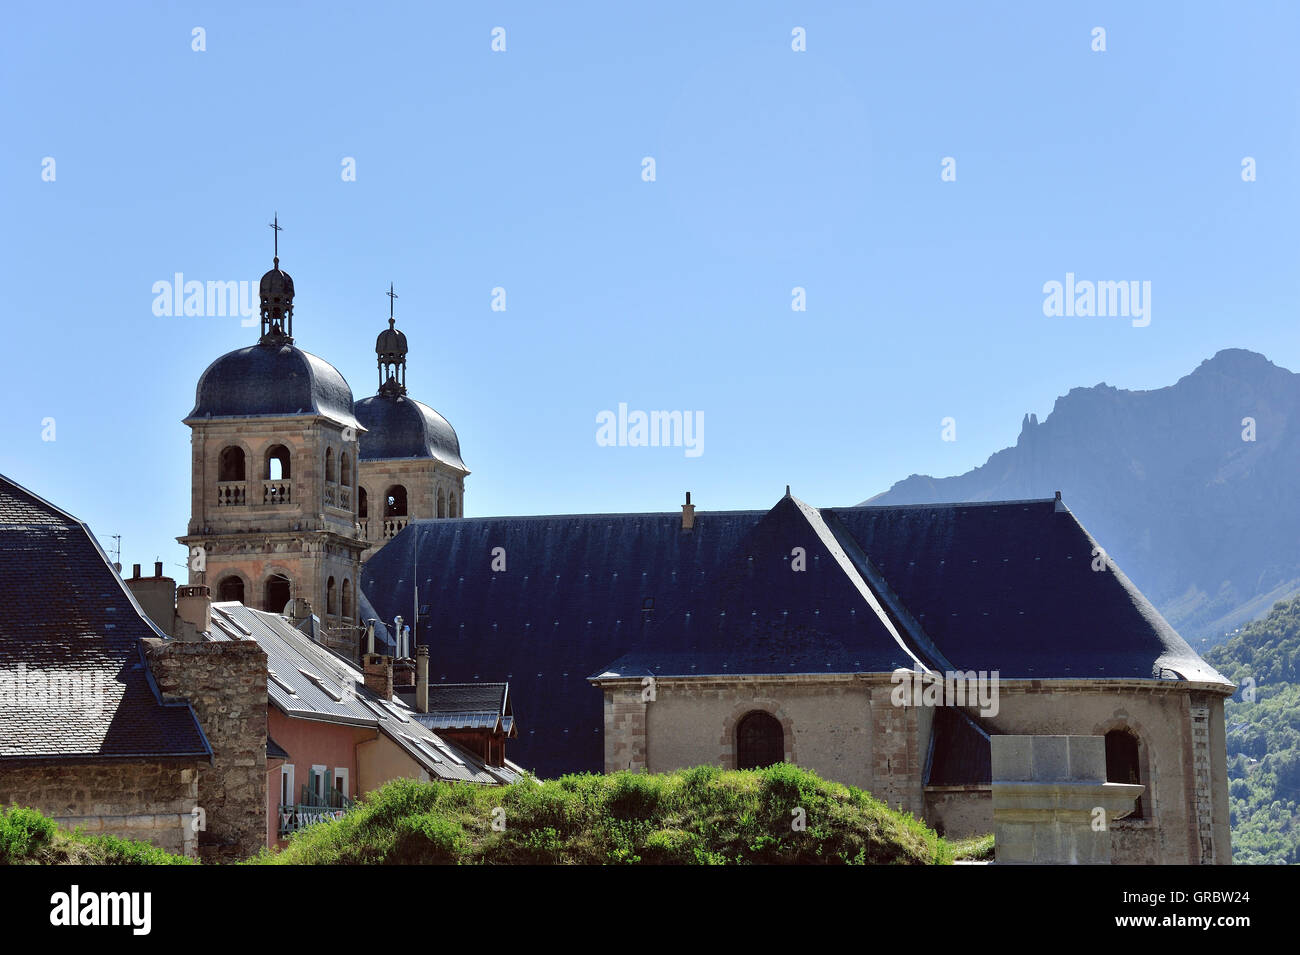 Briancon, Historic Town In The Mountains, Highest Town Of Europe, French Alps, France Stock Photo